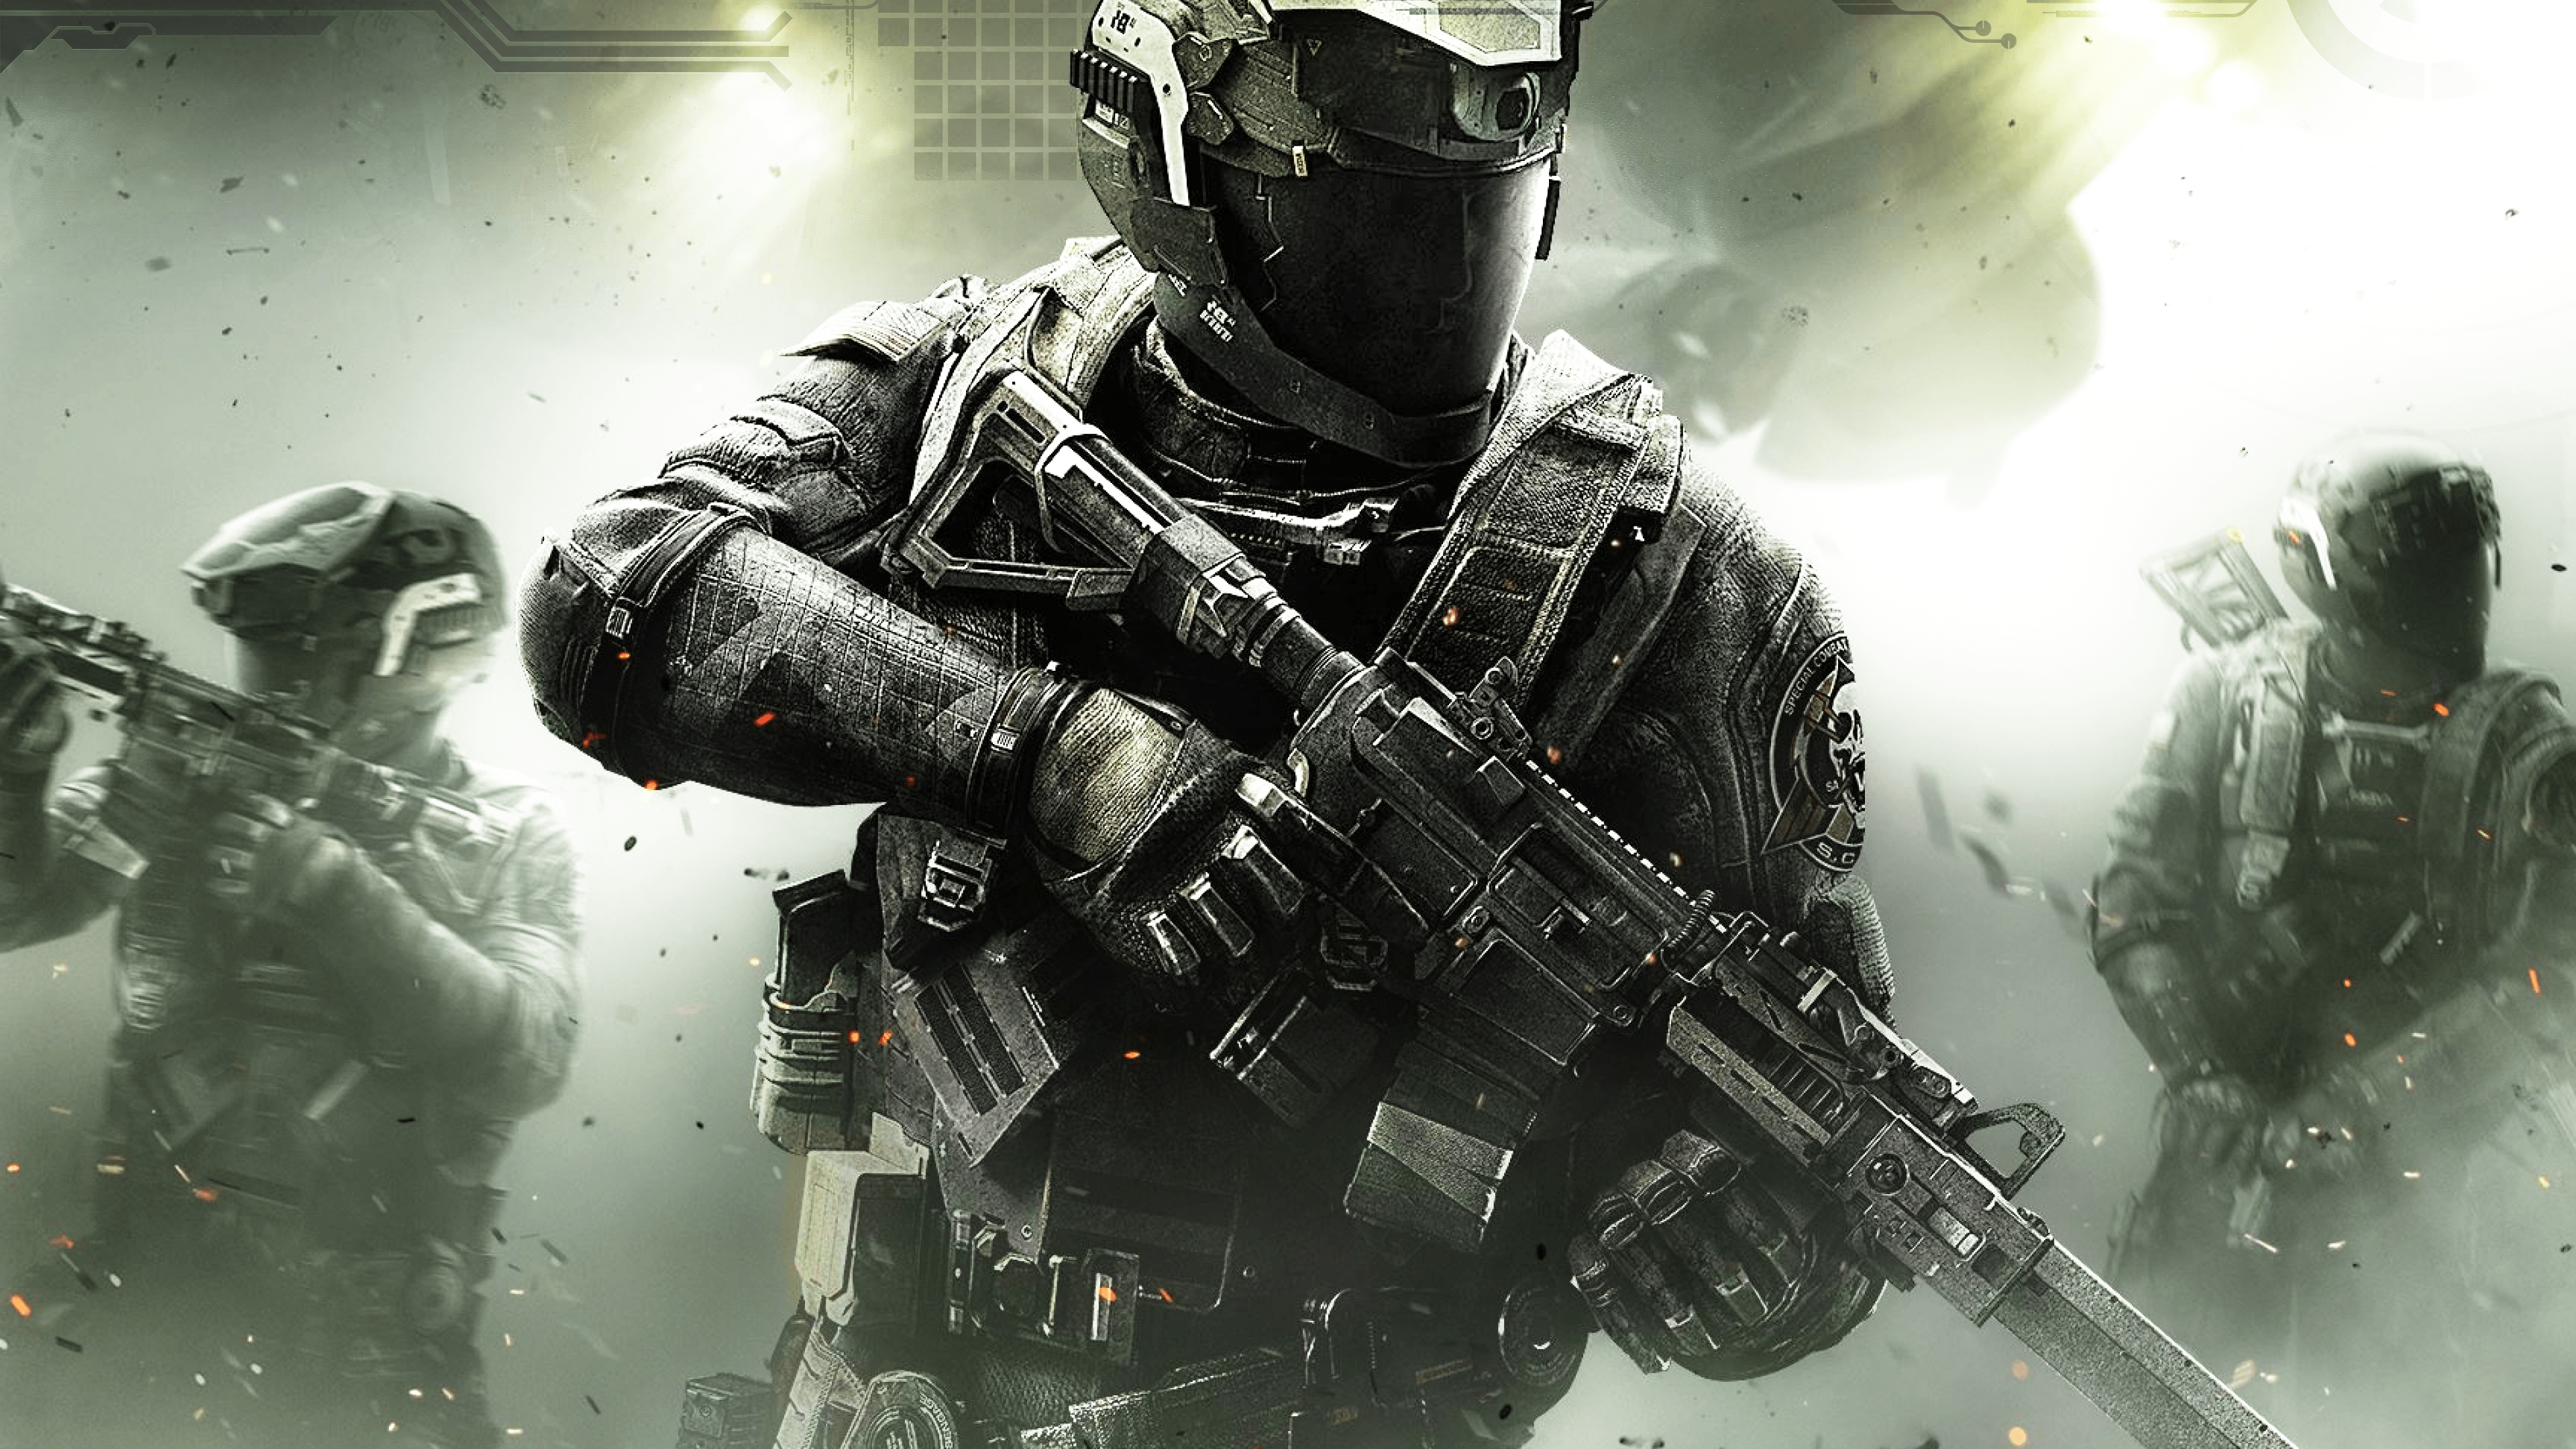 4K Call of Duty Wallpaper Free 4K Call of Duty Background